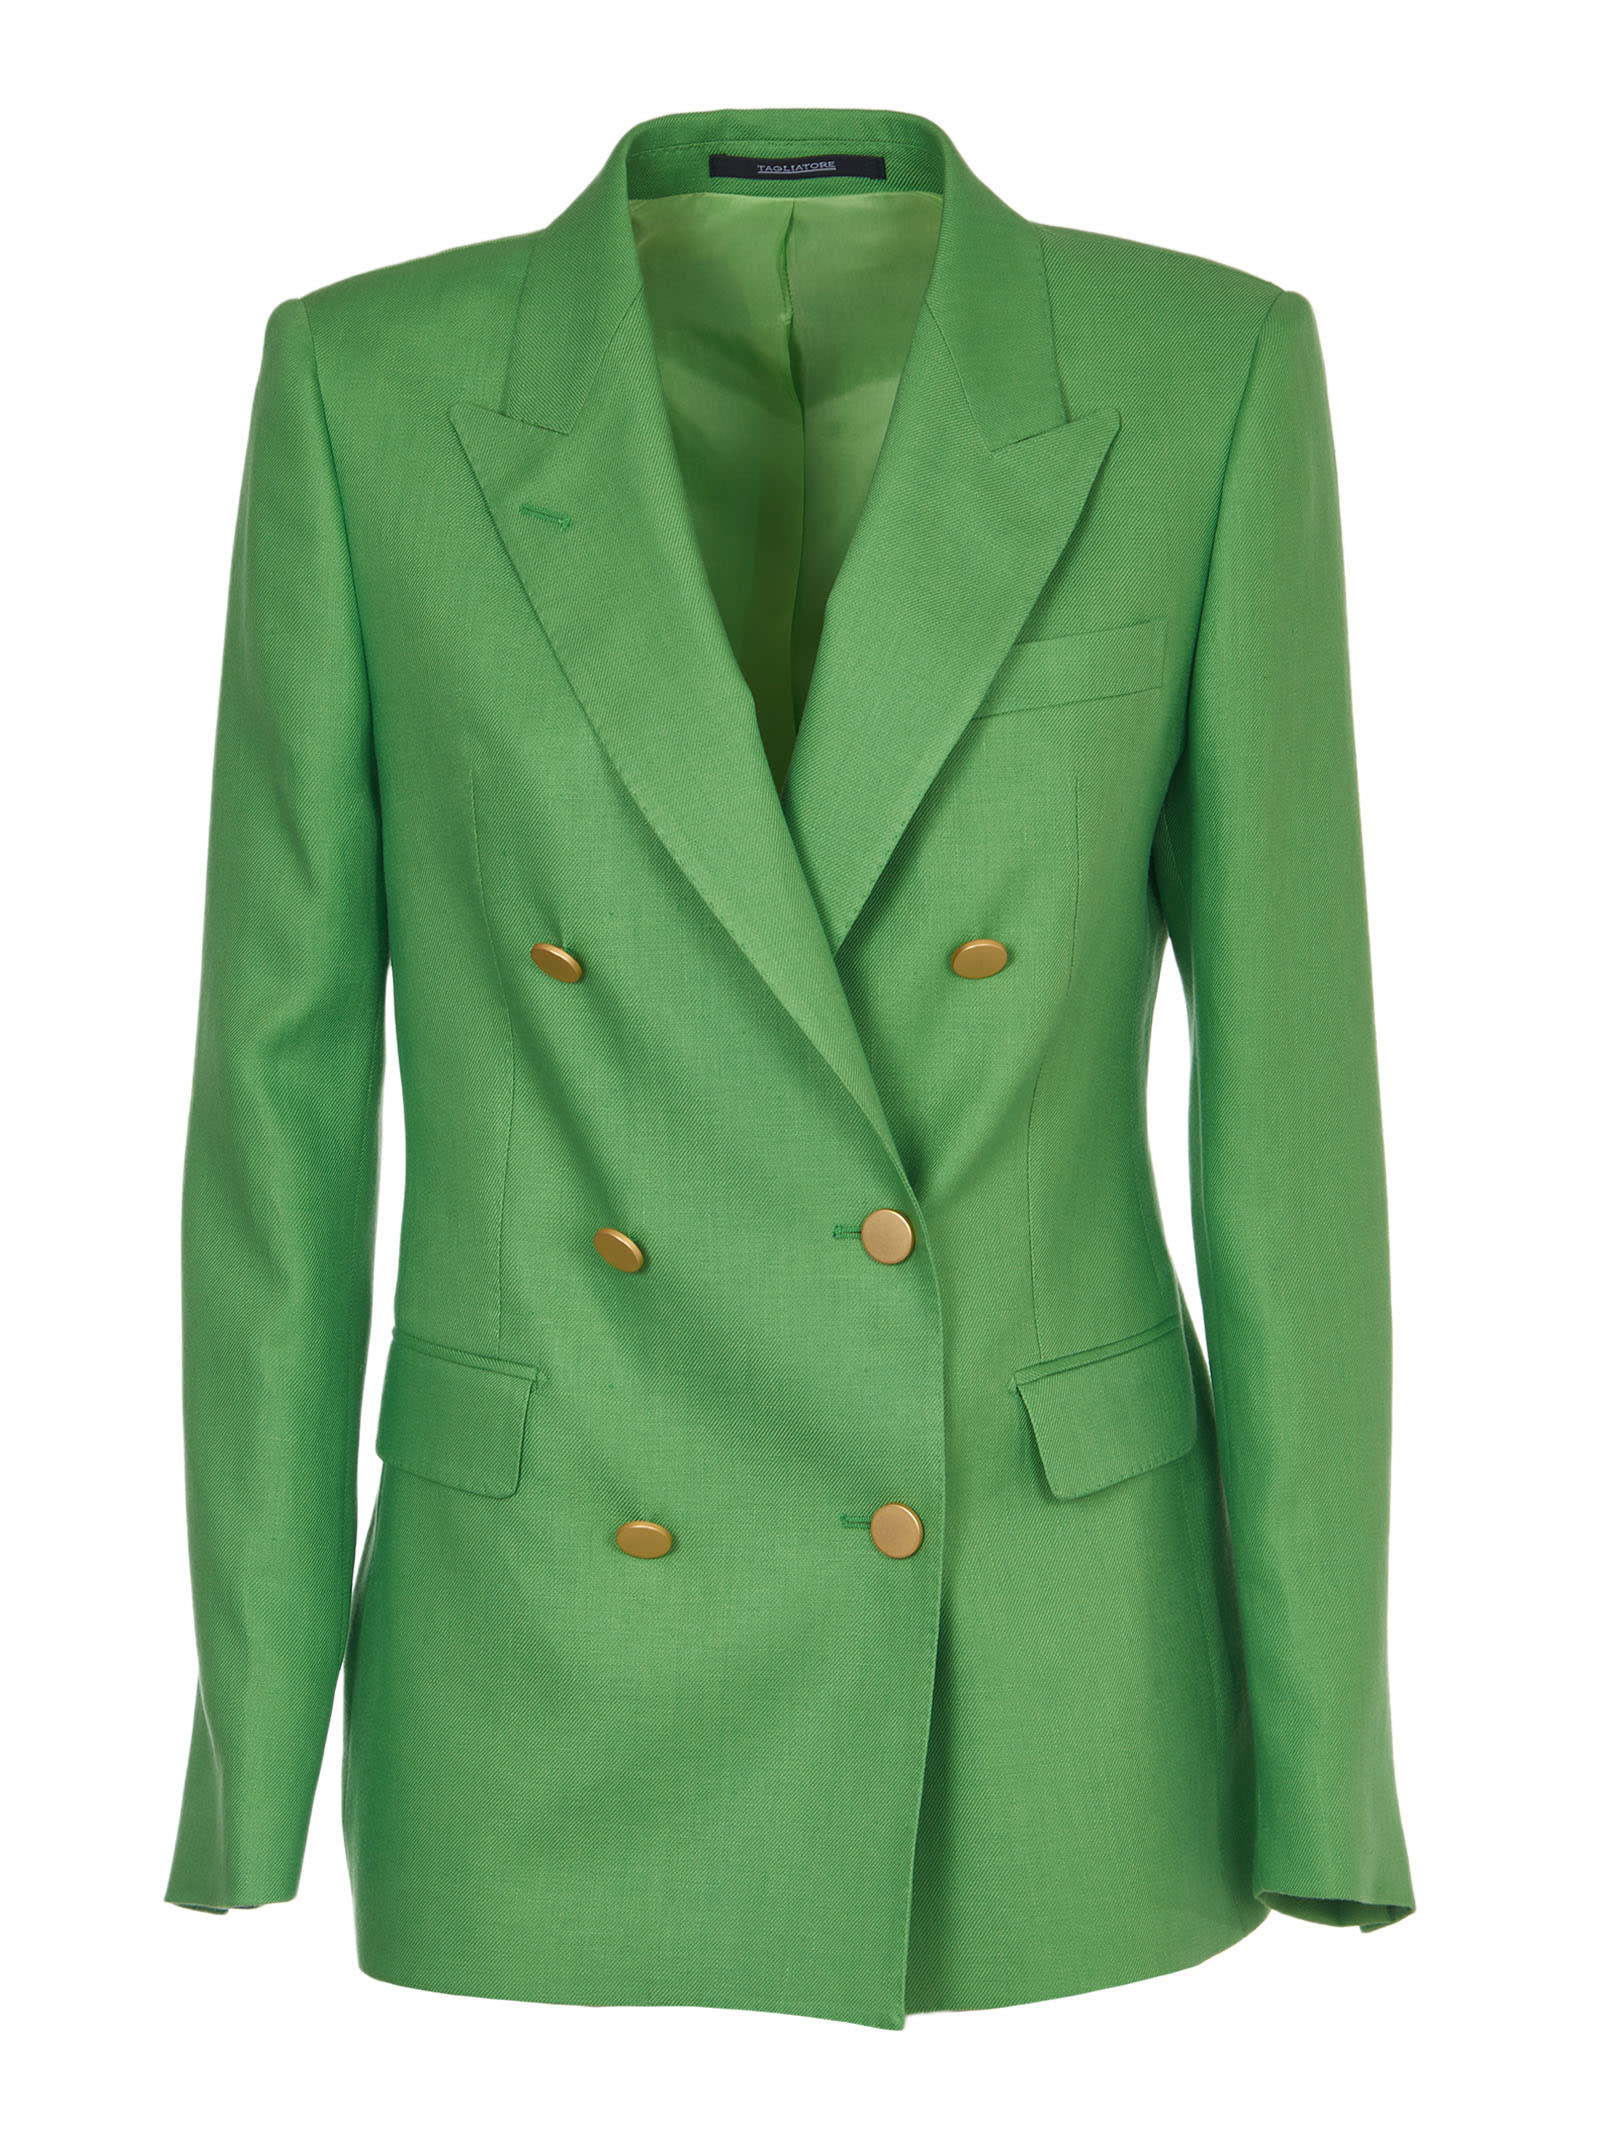 Tagliatore Green Linen Double-breasted Jacket